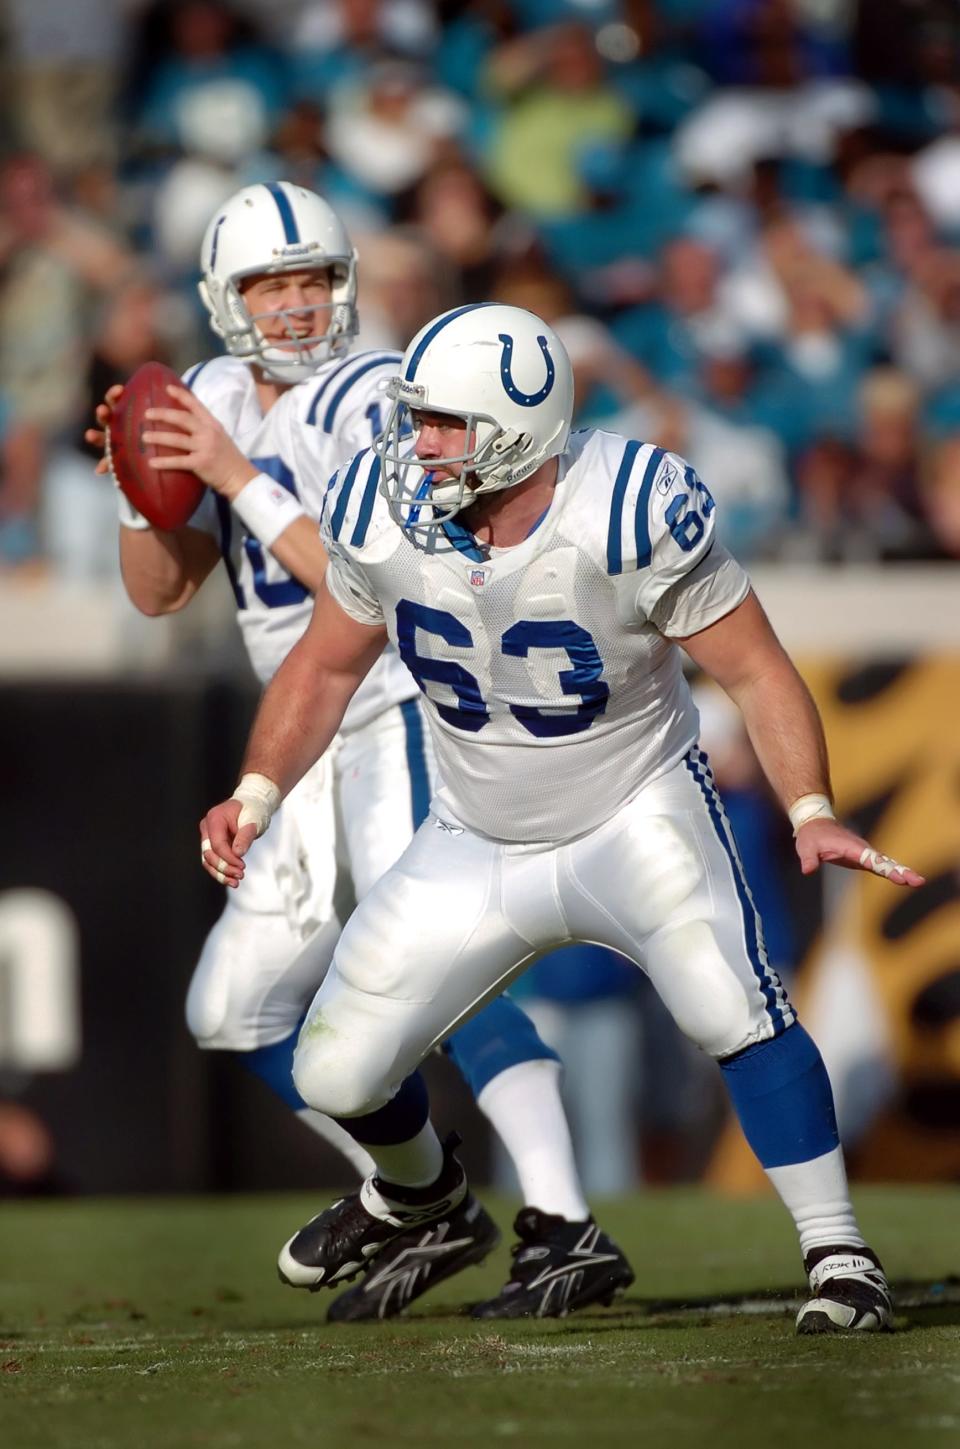 Jeff Saturday drops back to protect quarterback Peyton Manning during a game in 2006.